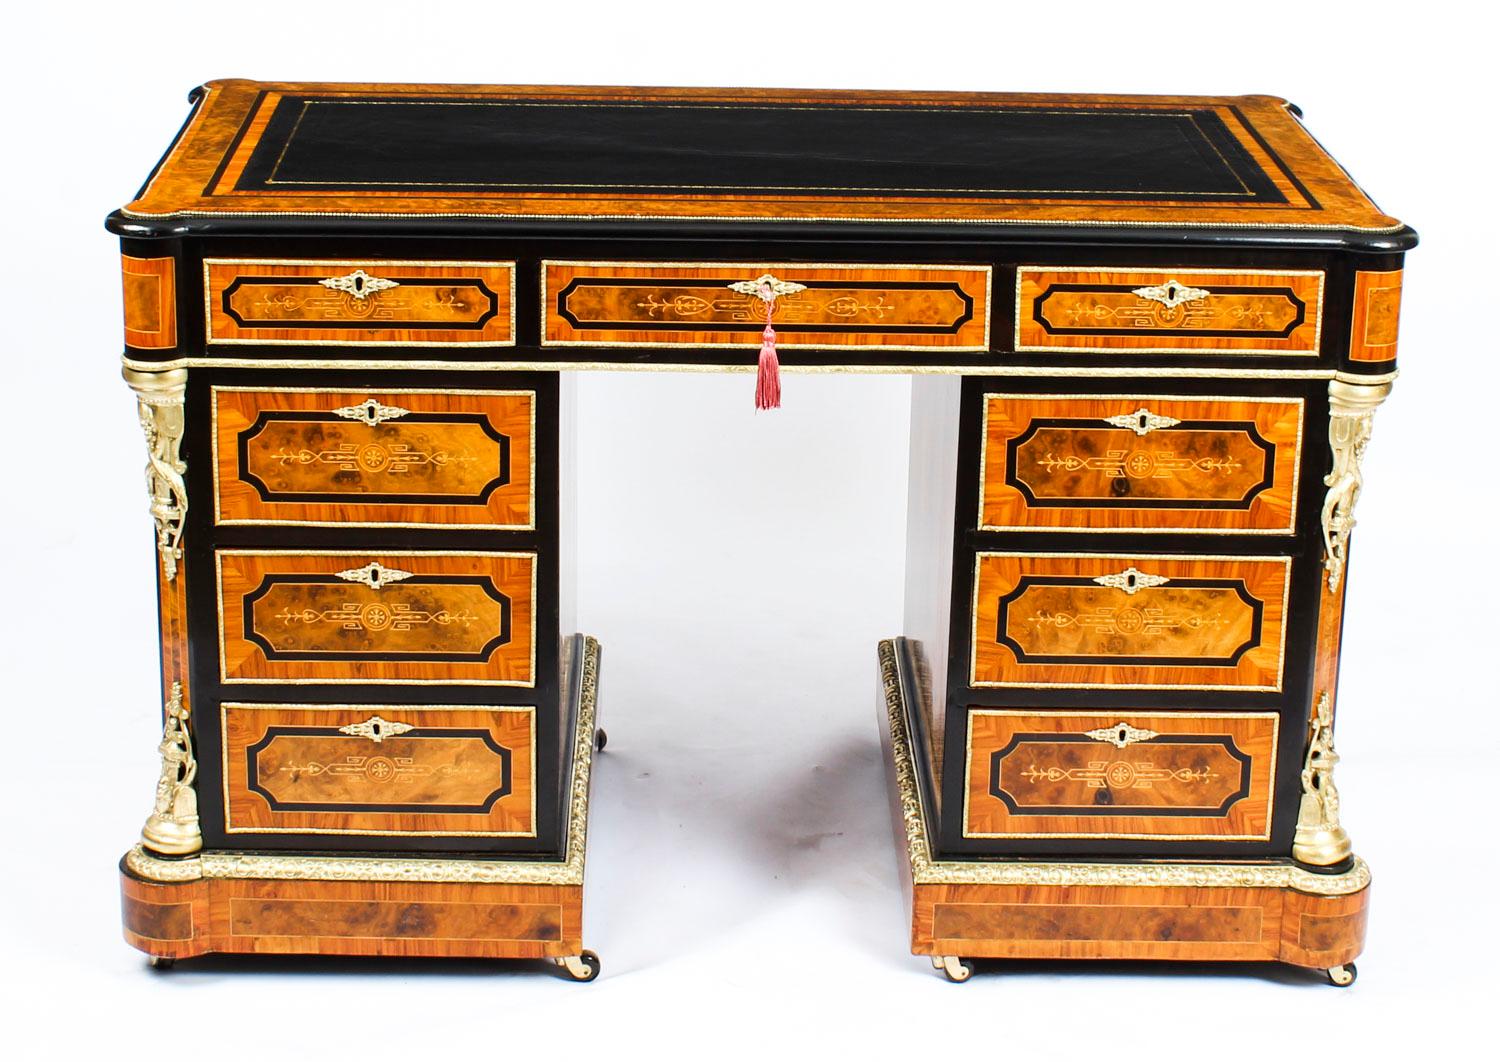 A beautiful Victorian burr walnut, olivewood, ebonized and ormolu-mounted pedestal desk, attributed to Holland & Sons, circa 1870 in date.

The rectangular top with an inset black gilt tooled leather writing surface above three frieze drawers with